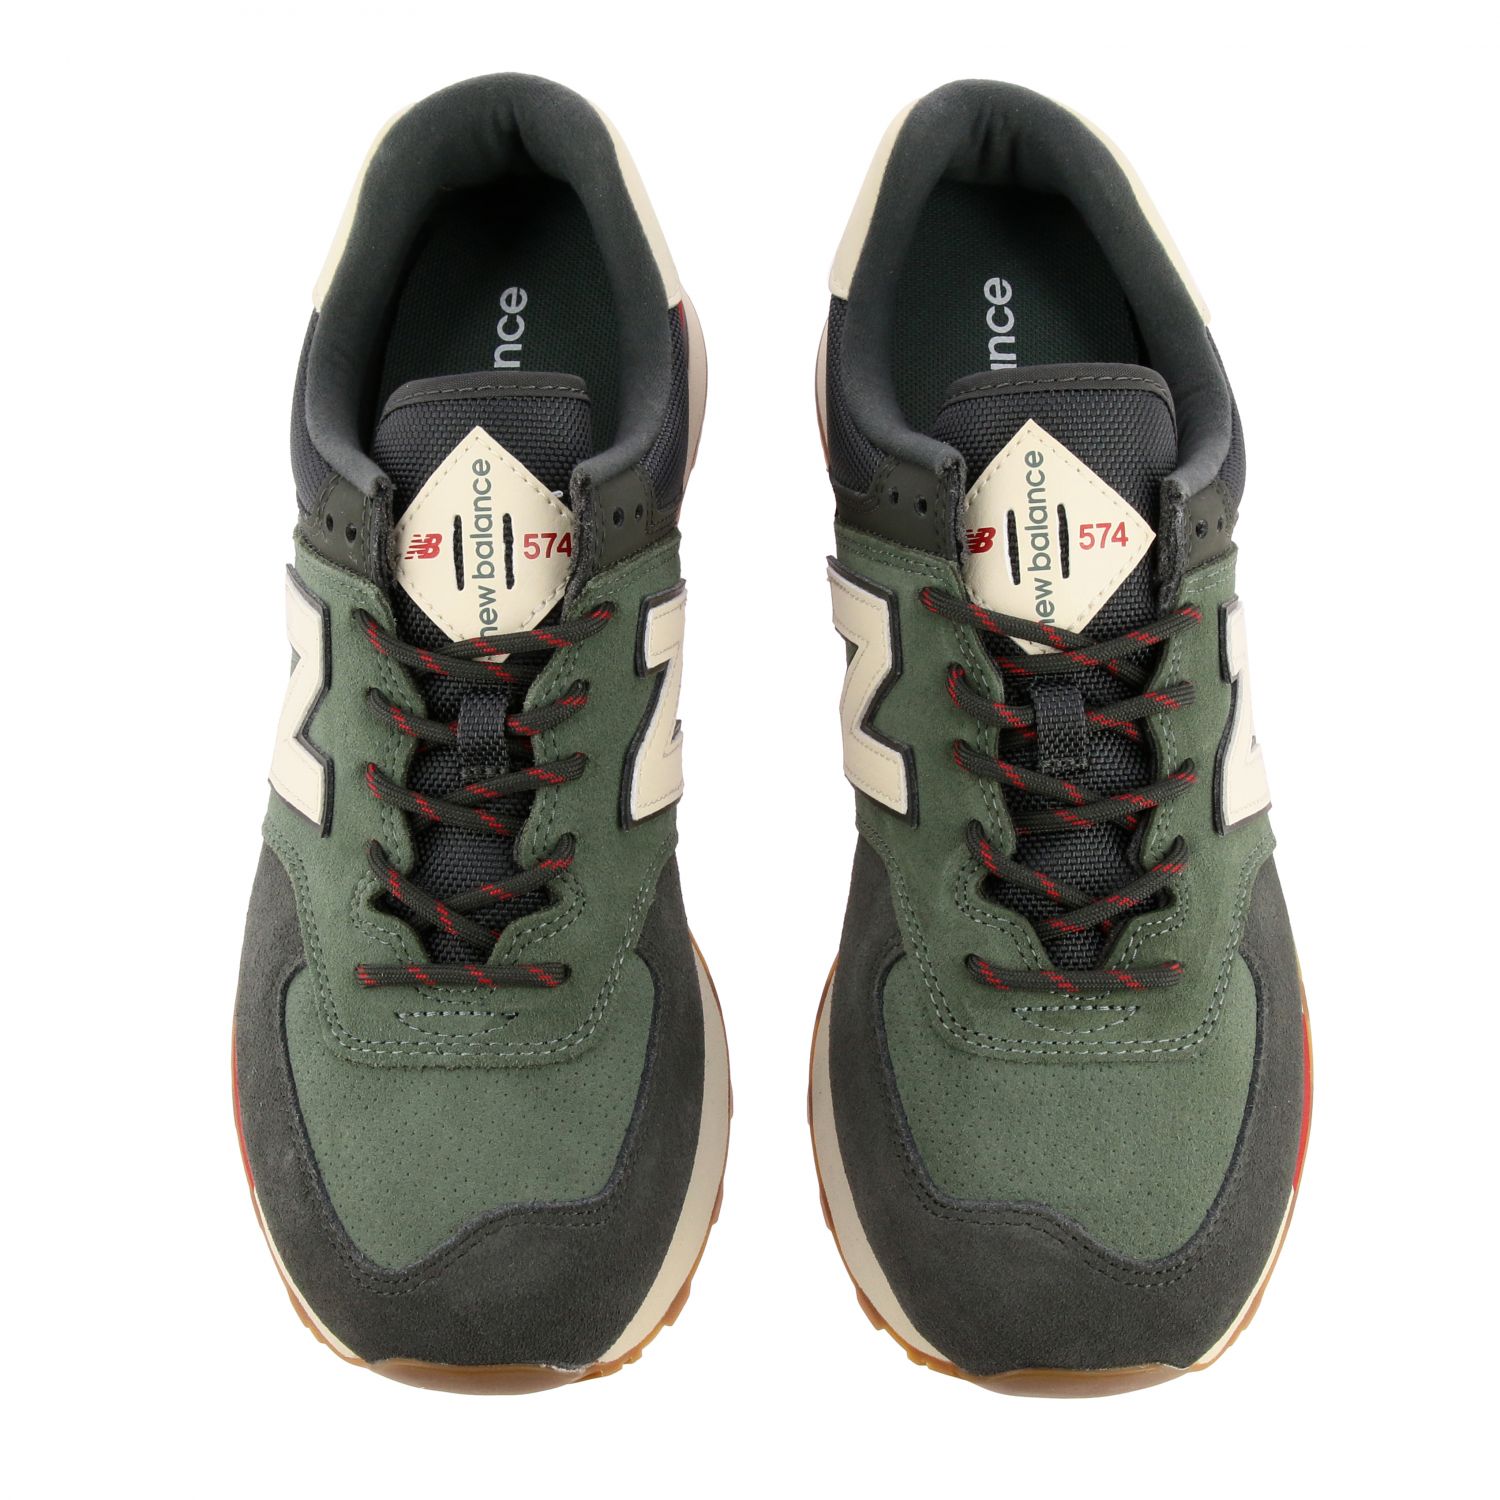 New Balance Outlet: 574 sneakers camoscio mesh | Sneakers New ...